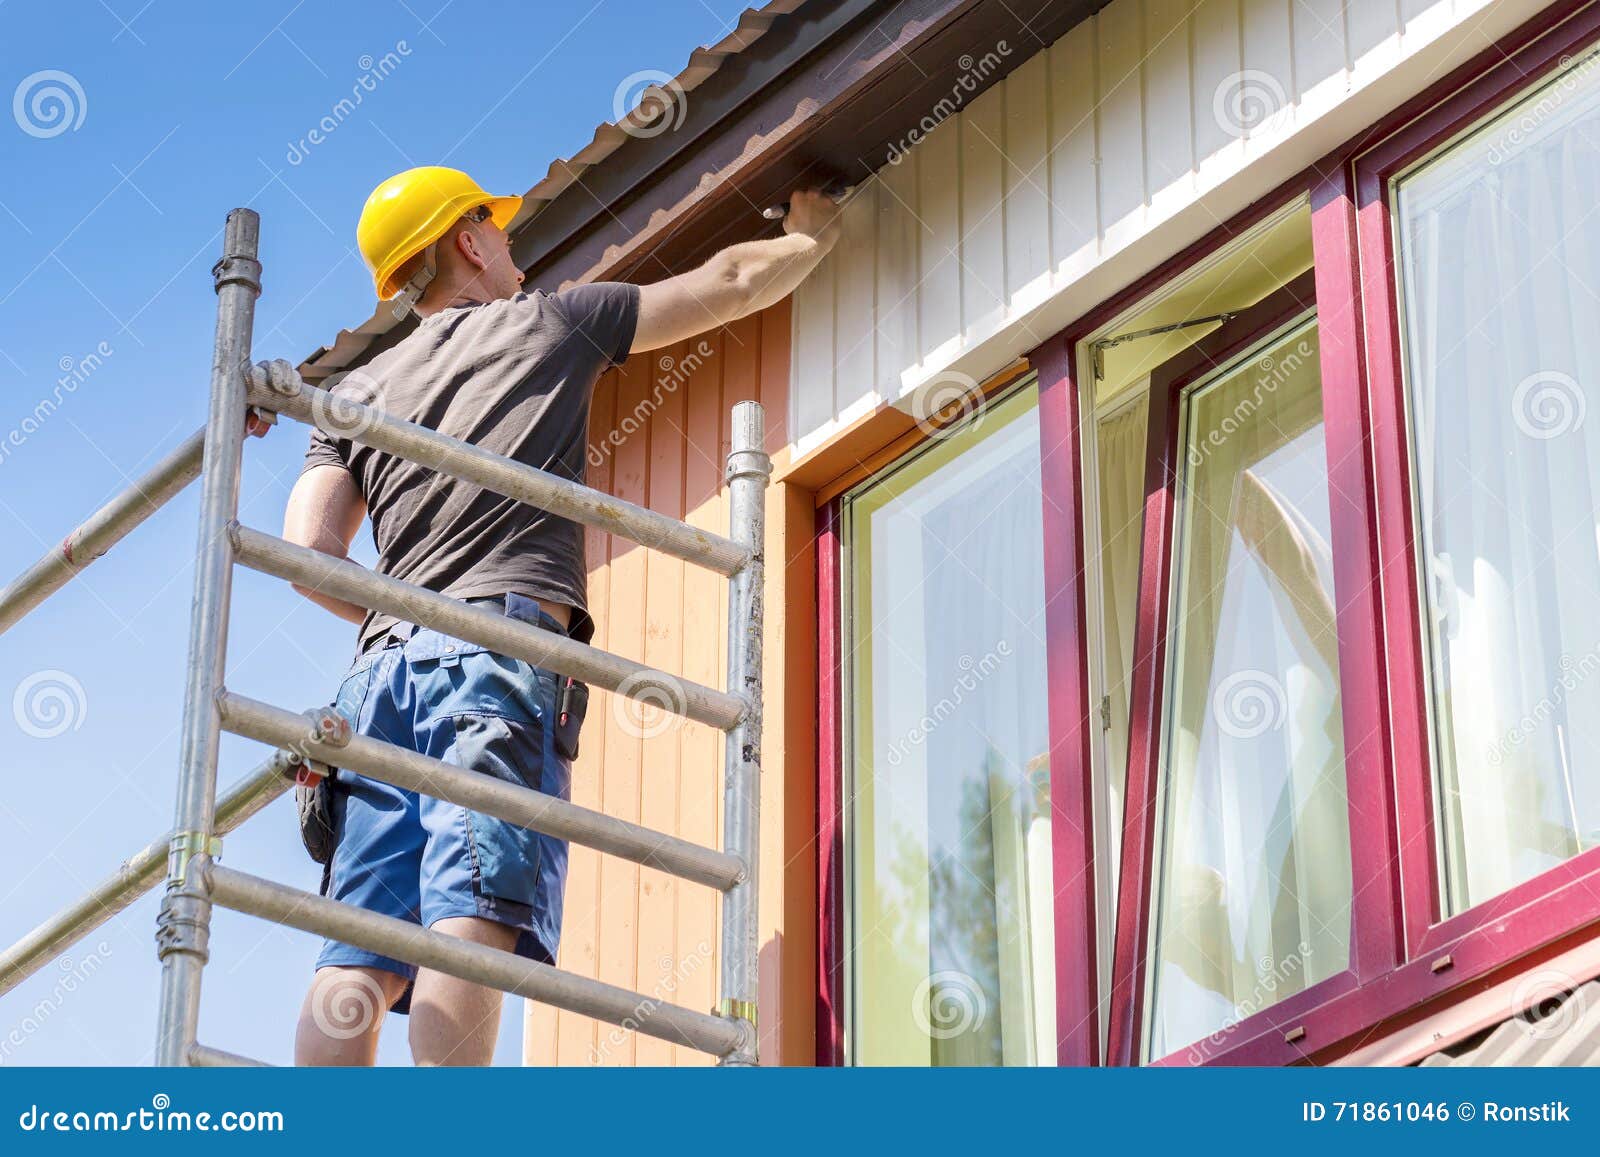 construction worker on scaffolding painting wooden house facade